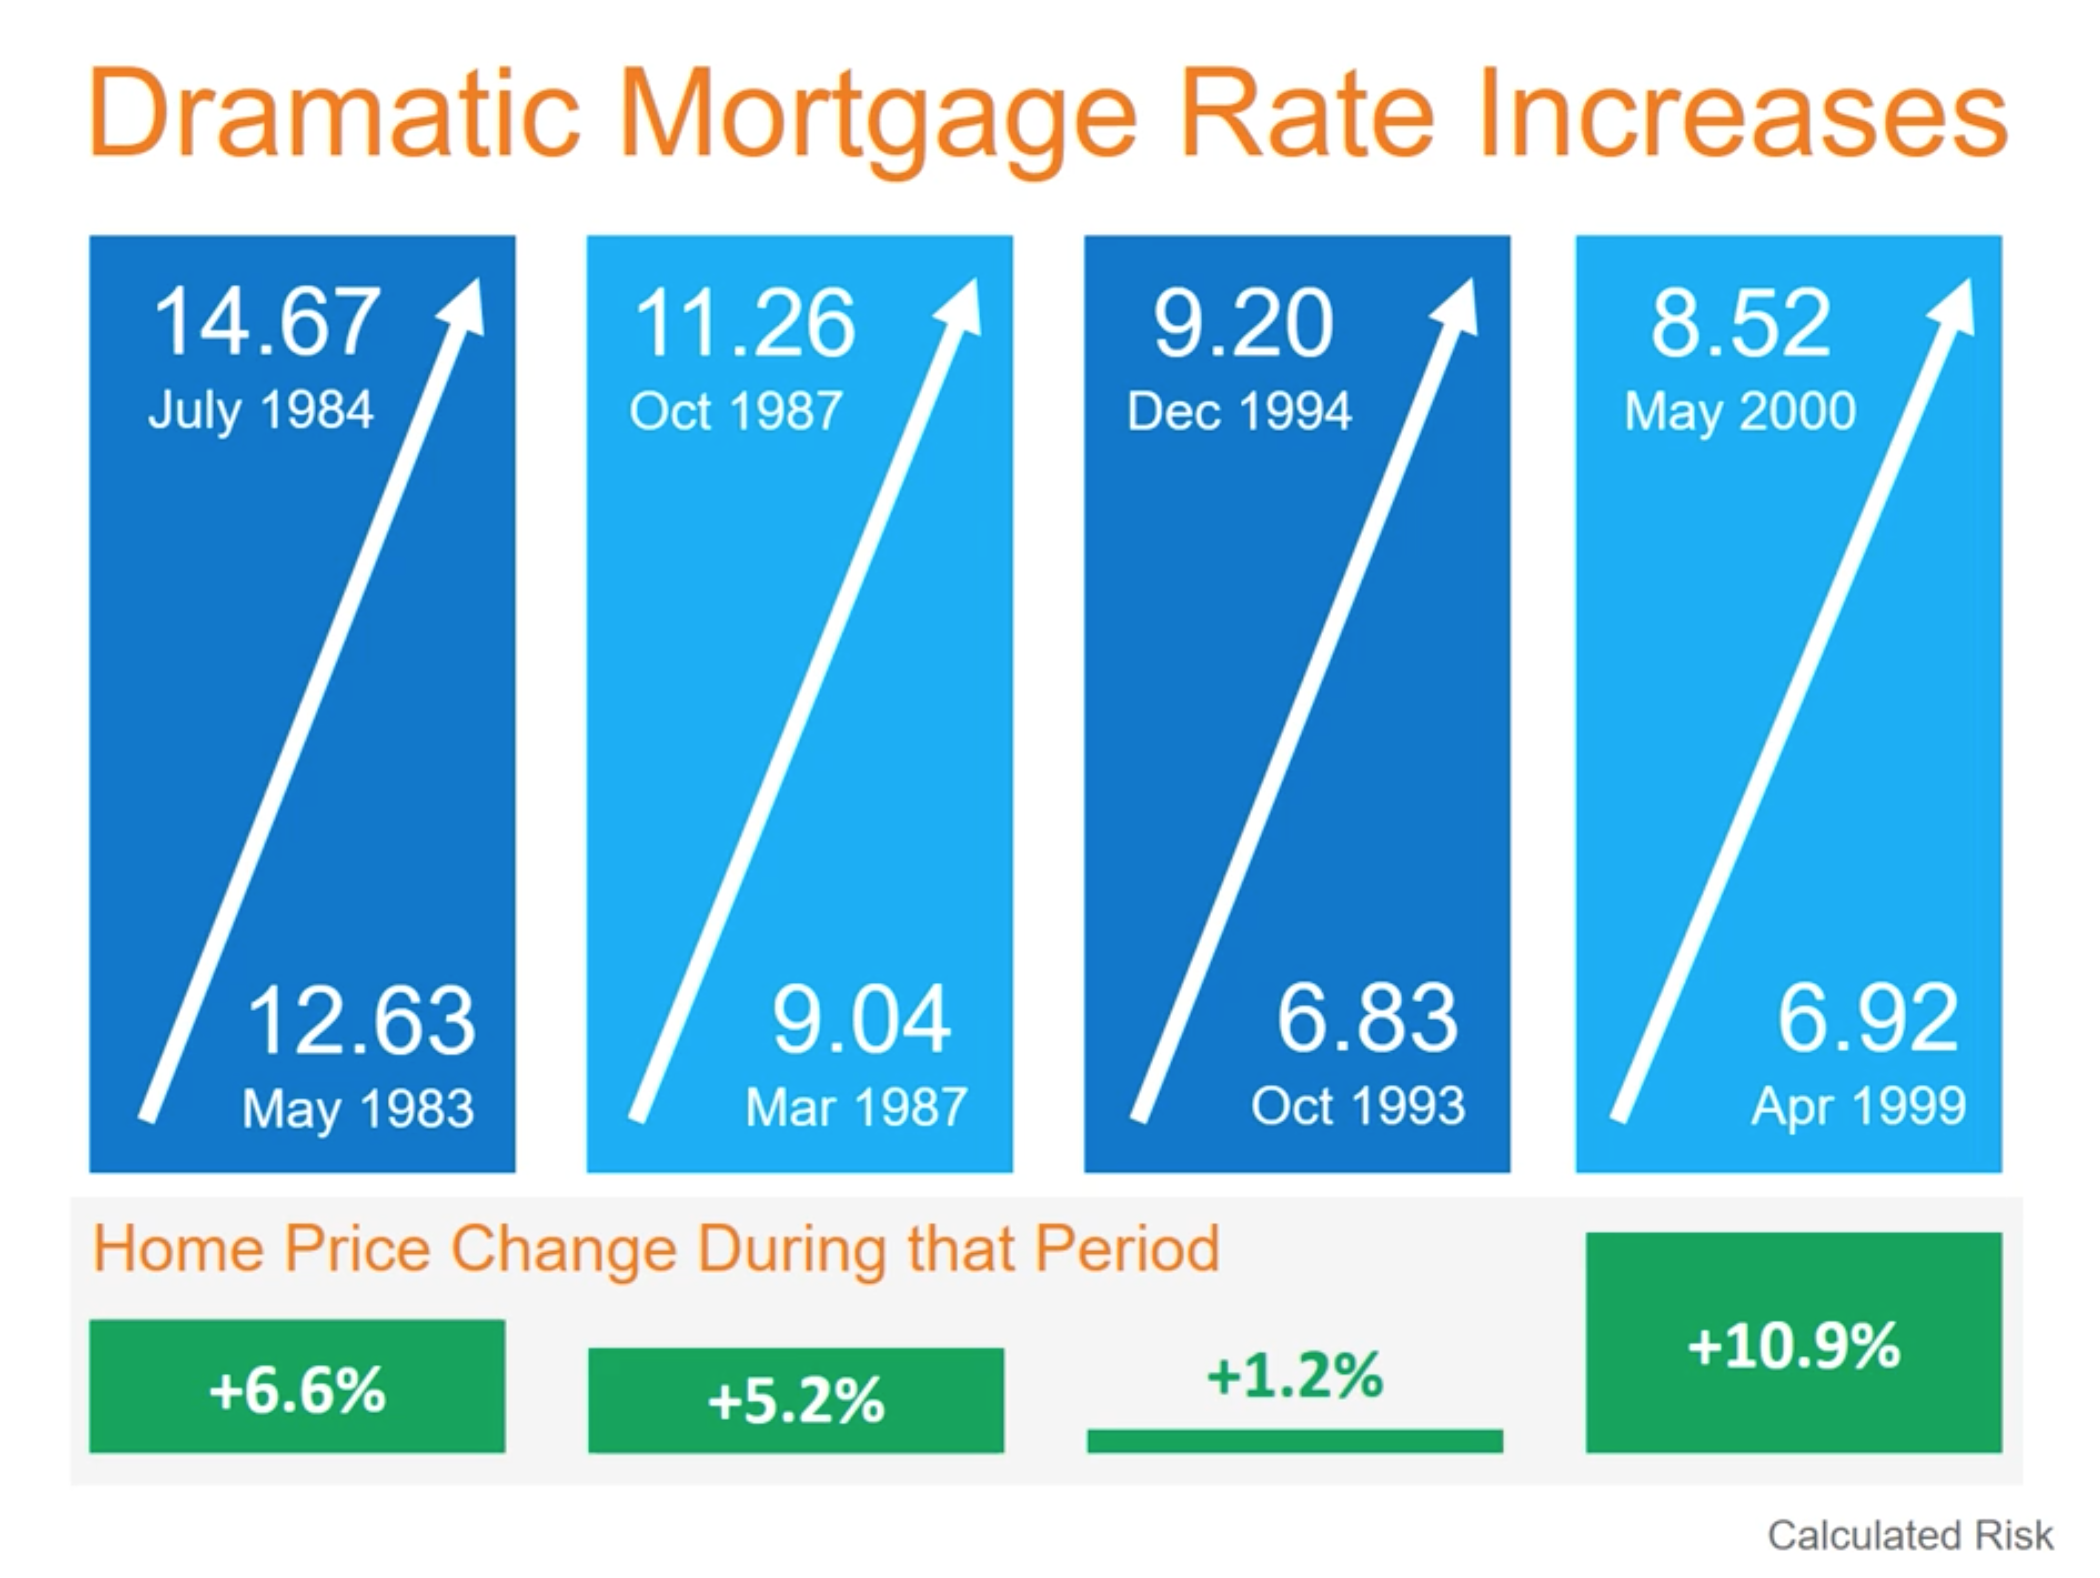 Are Mortgage Rates Deciding Home Prices? Historically, No.